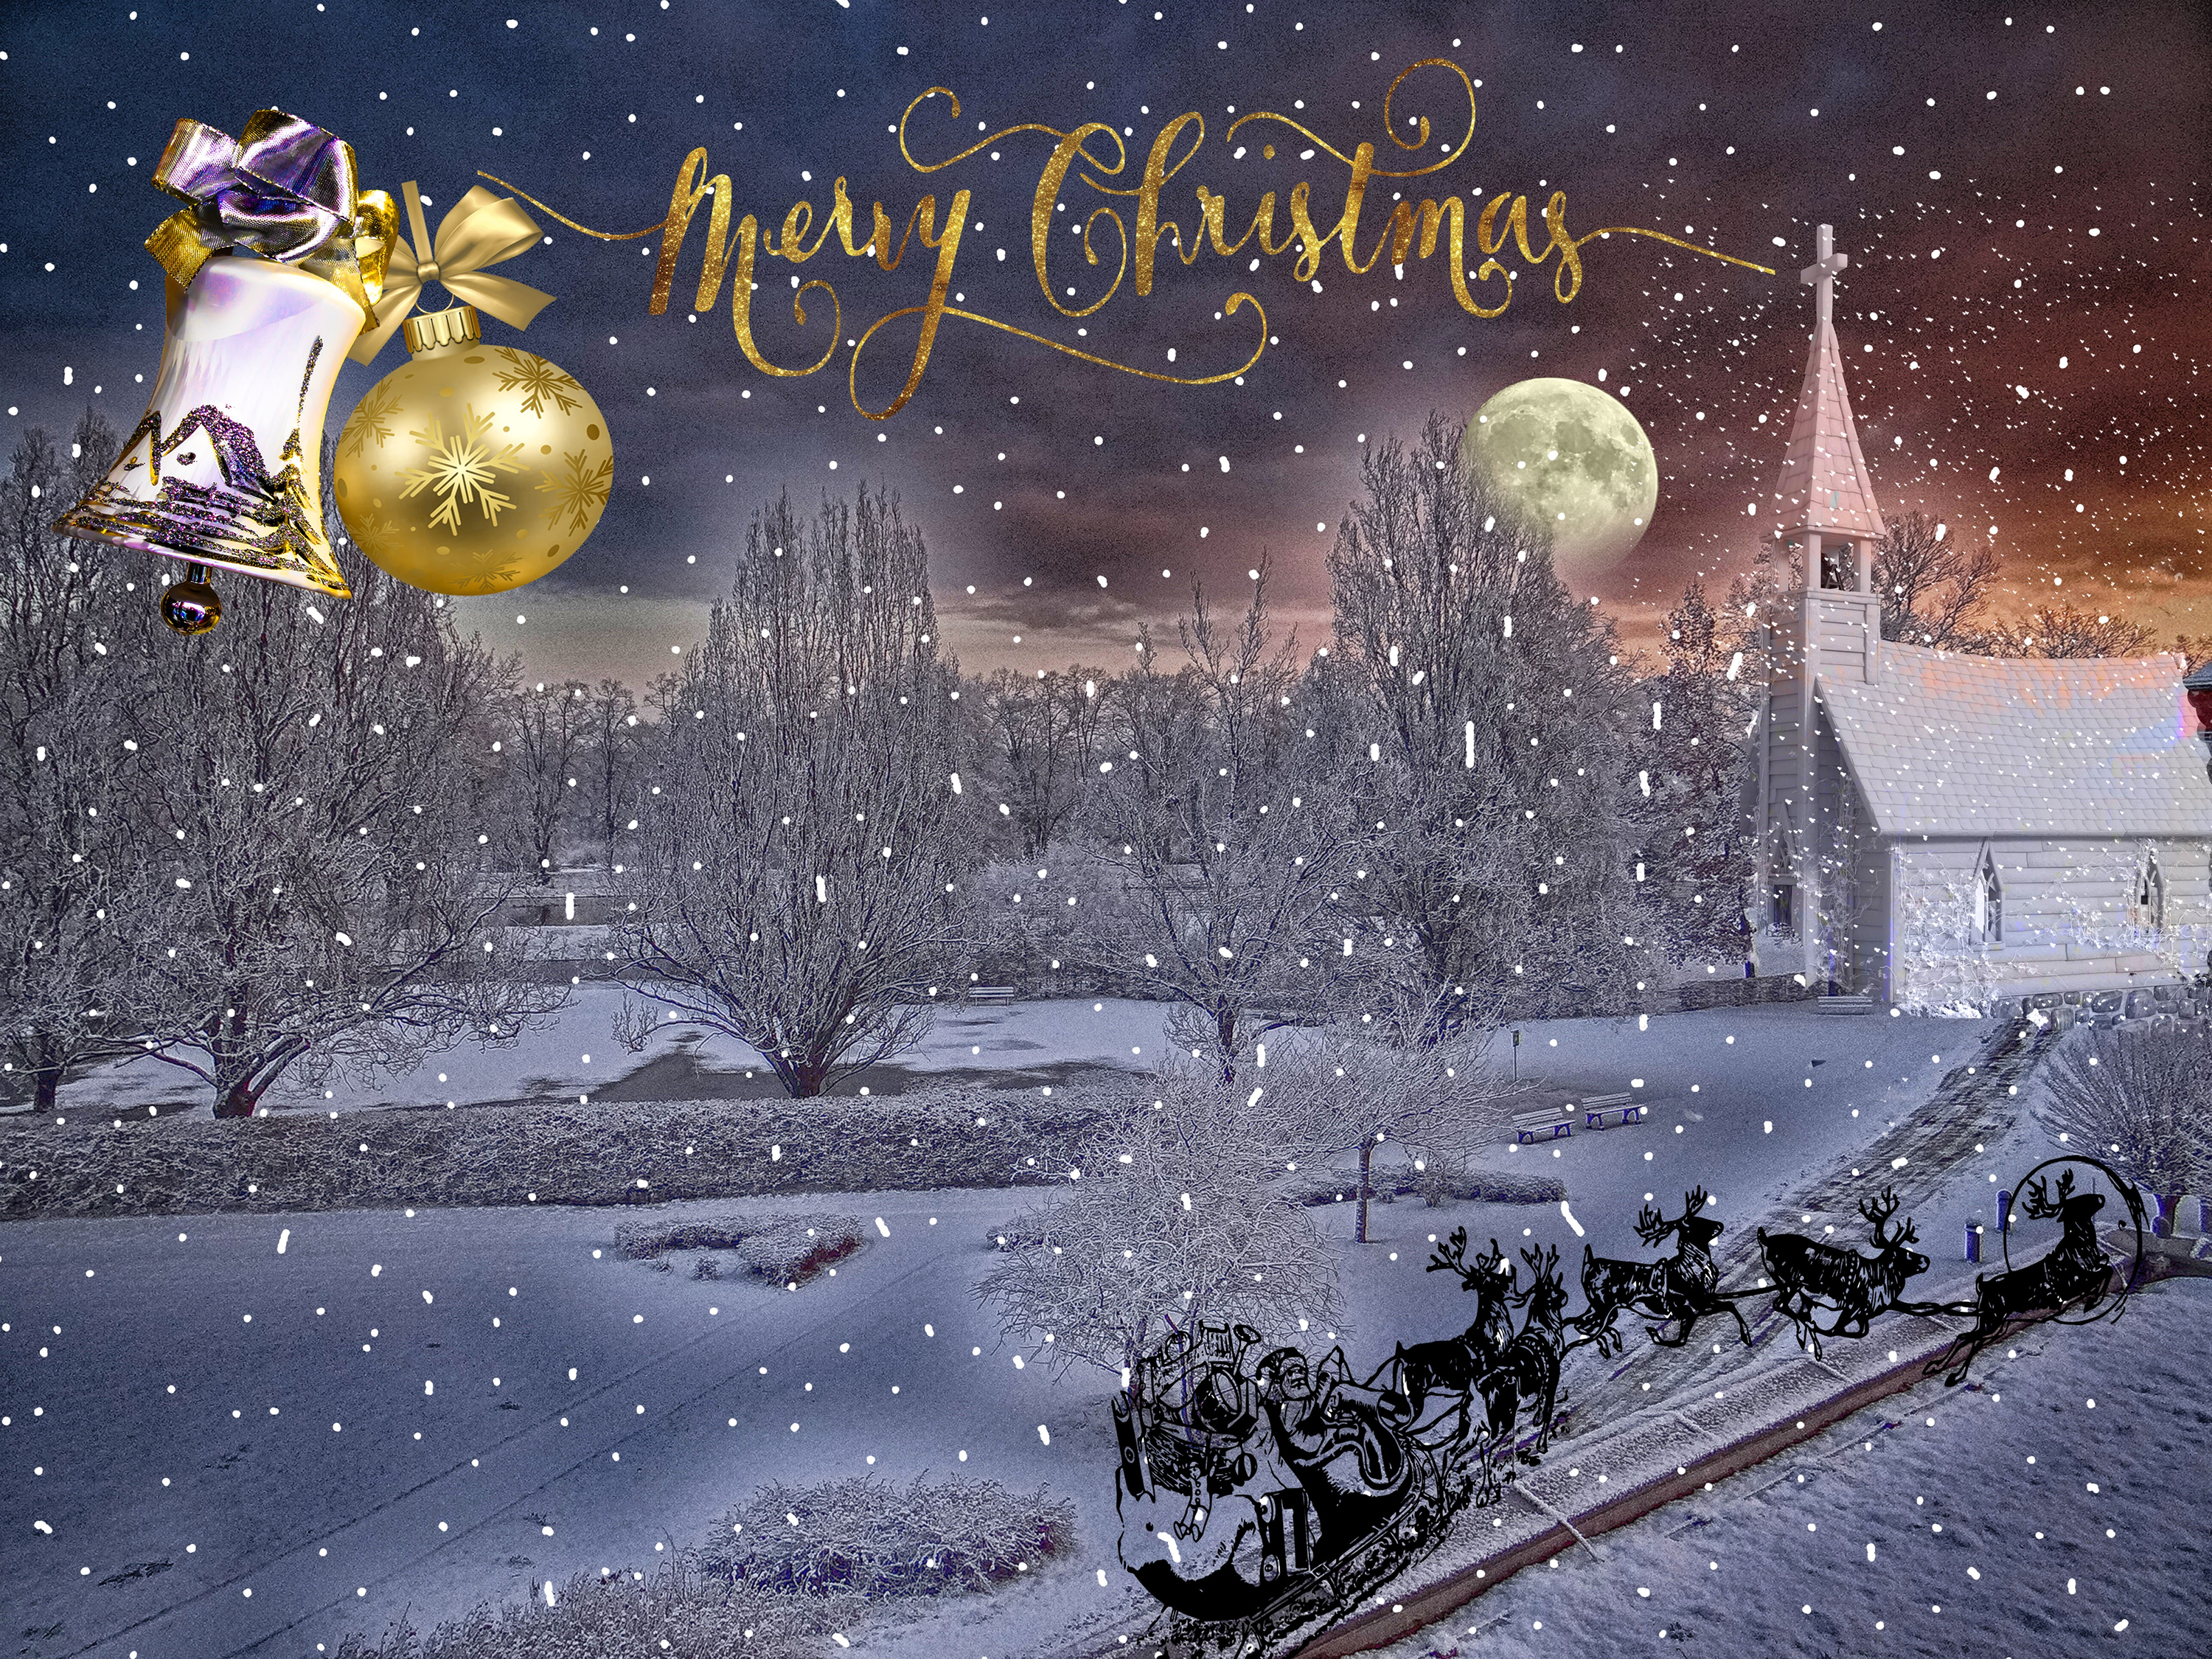 moon, merry christmas, holiday, christmas, bauble, bell, church, reindeer, sled, snow, winter 2160p